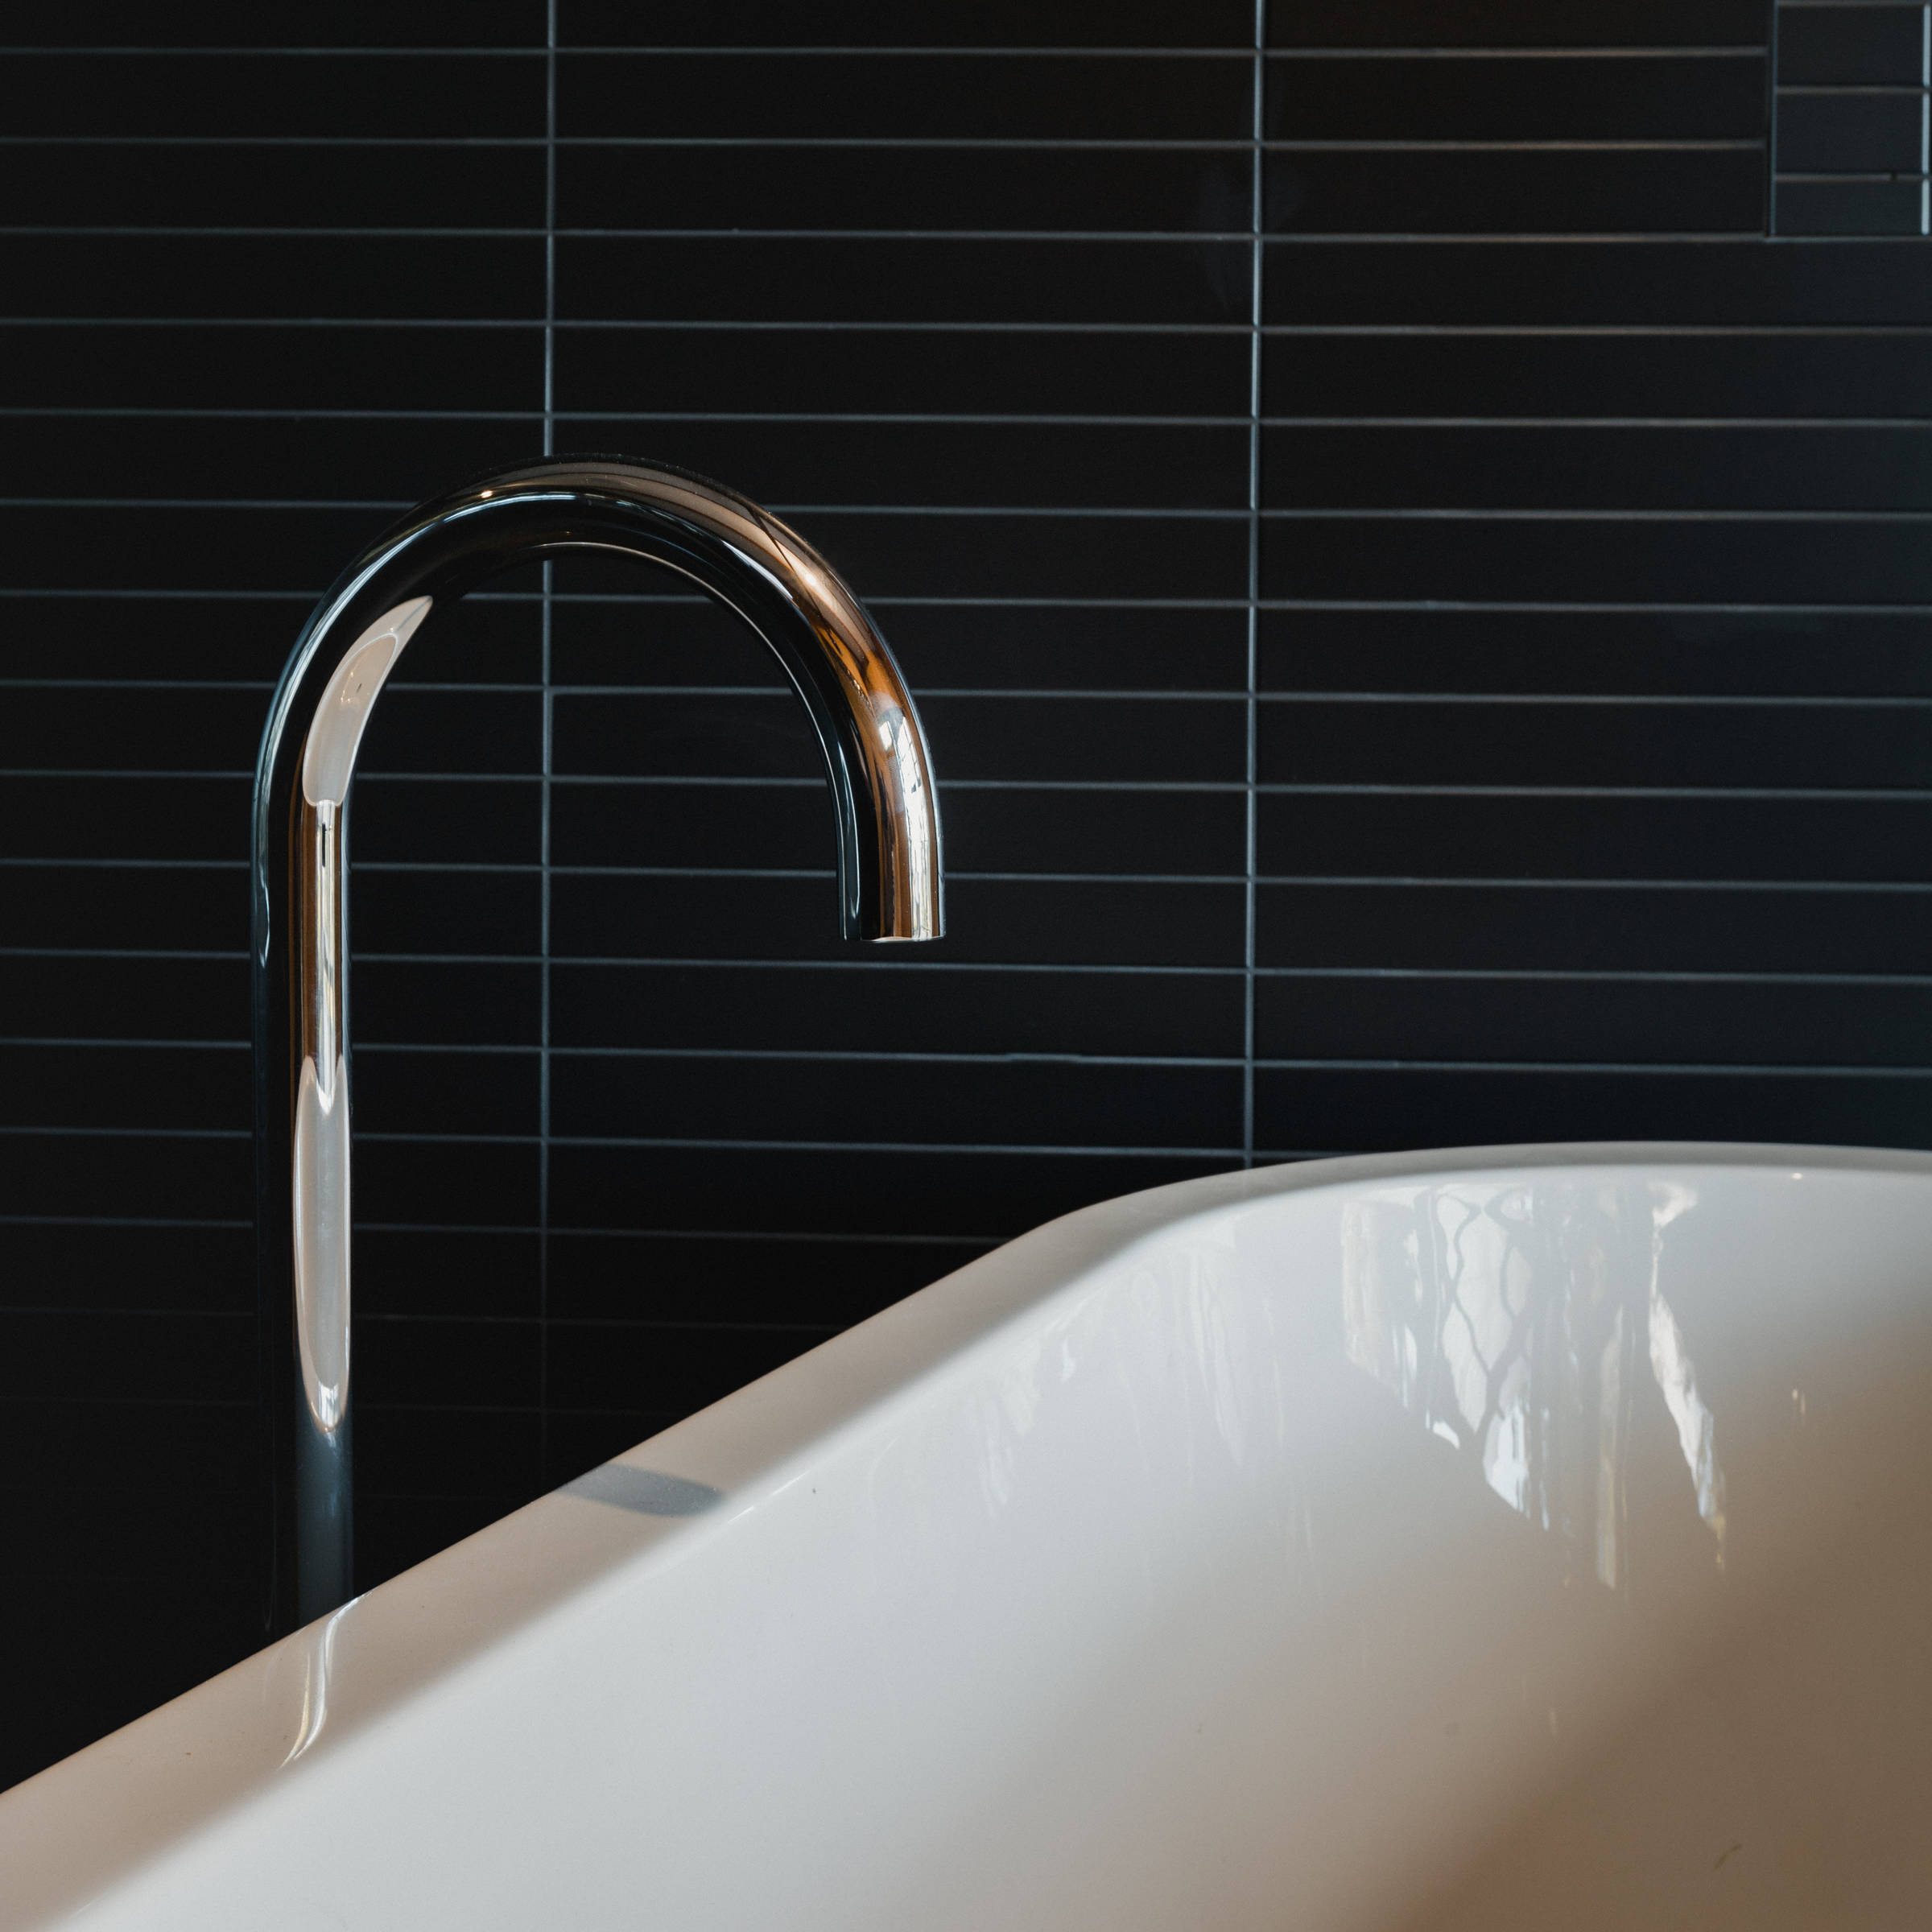 A Japanese inspired bathroom renovation with a freestanding bath, highlighted by black mosaic tiles and chrome tapware. Photo: Jordan Davis.